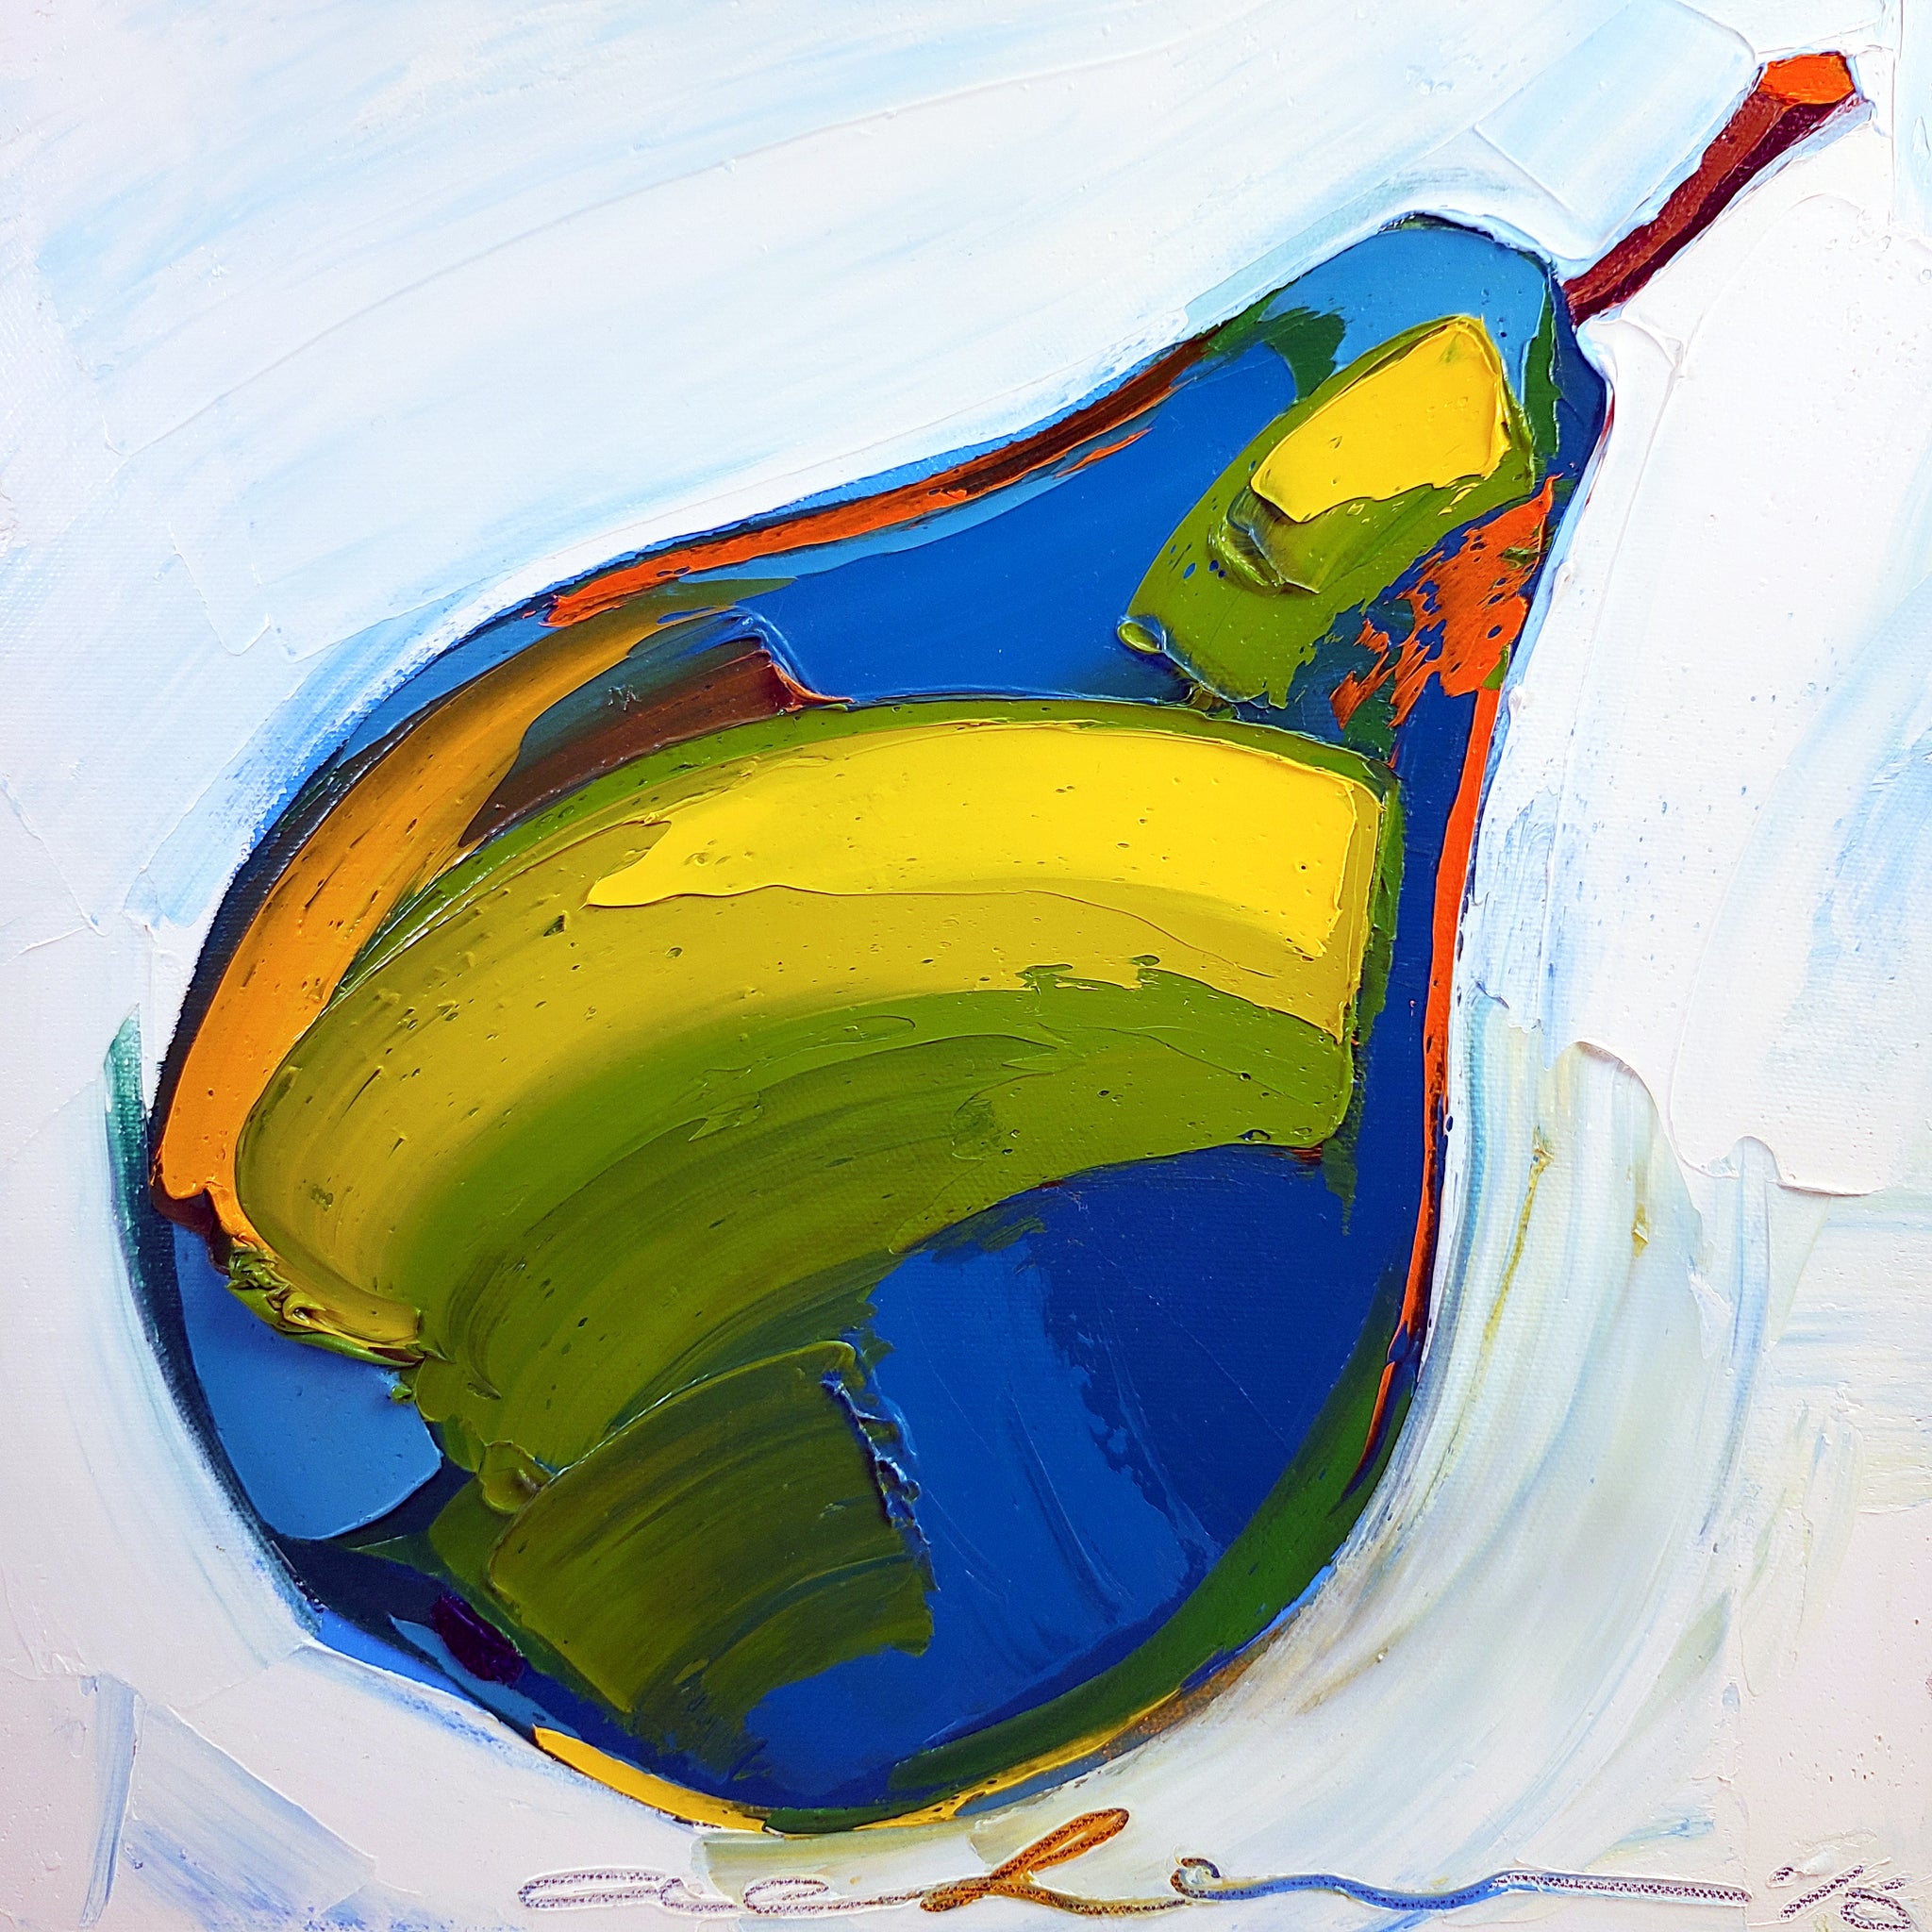 Chow - 12"x12" Oil Painting - "Pear of Savior"